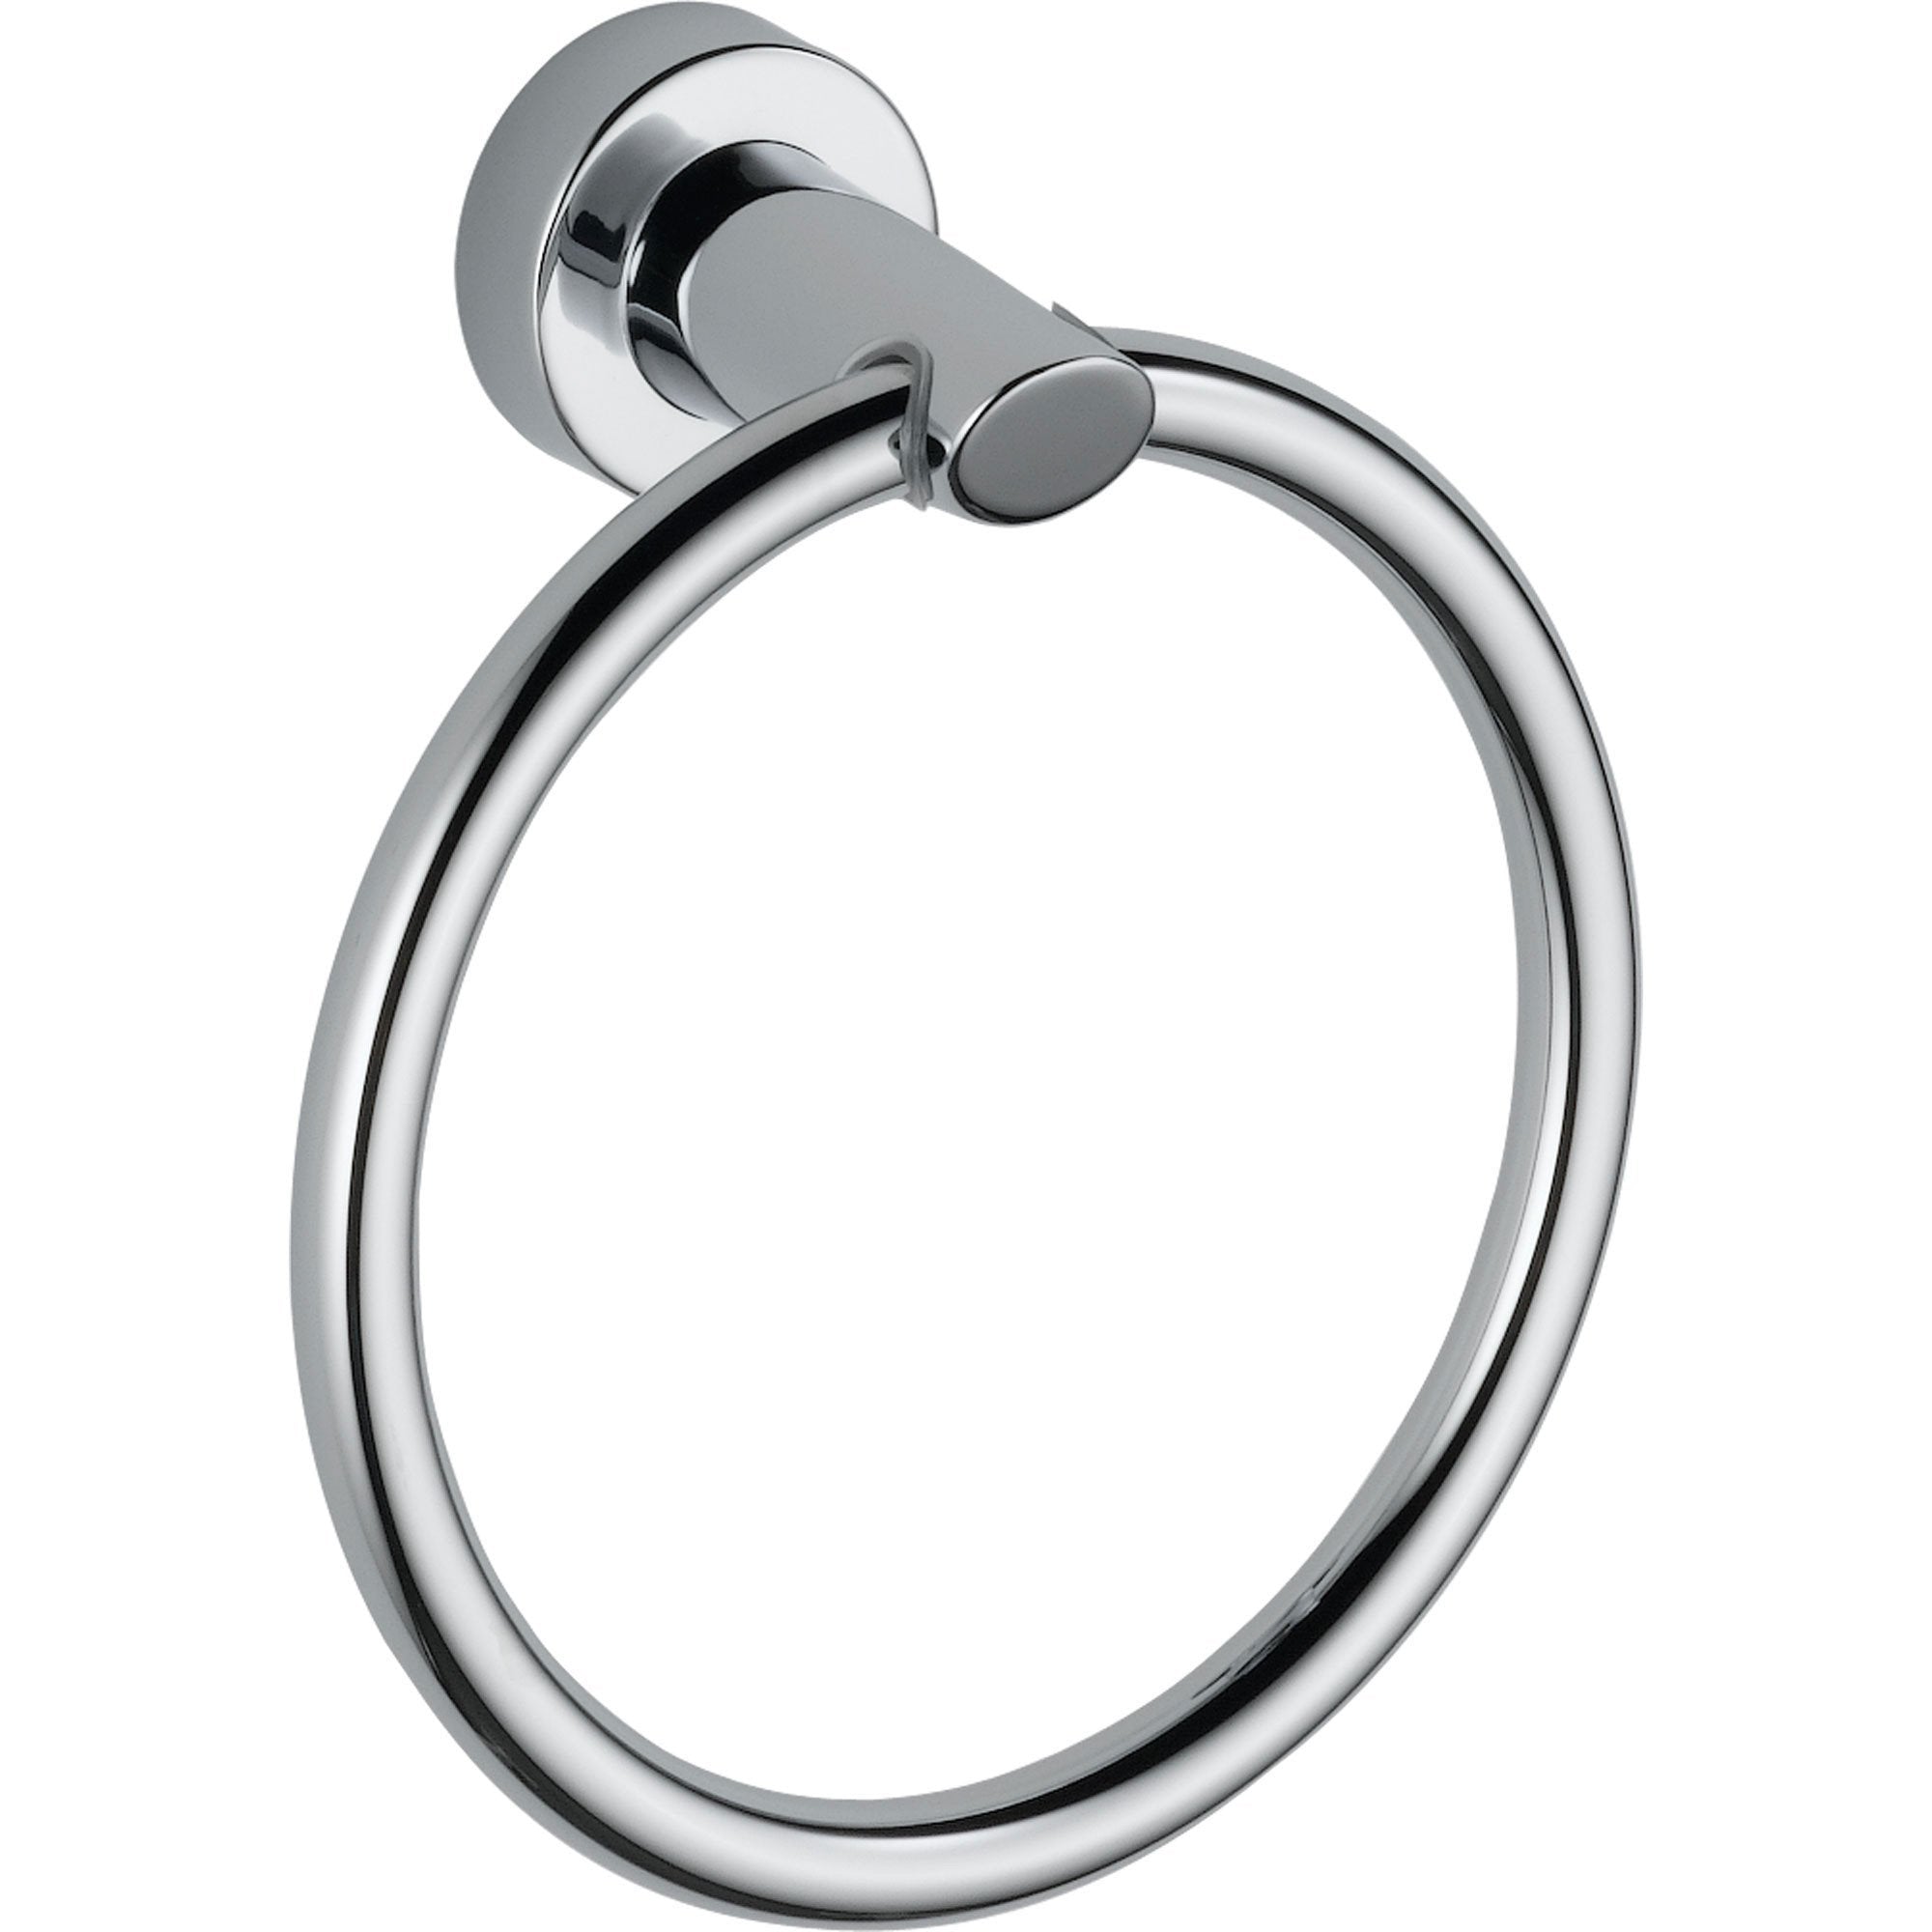 Delta Compel Modern Contemporary Chrome Hand Towel Ring 352997